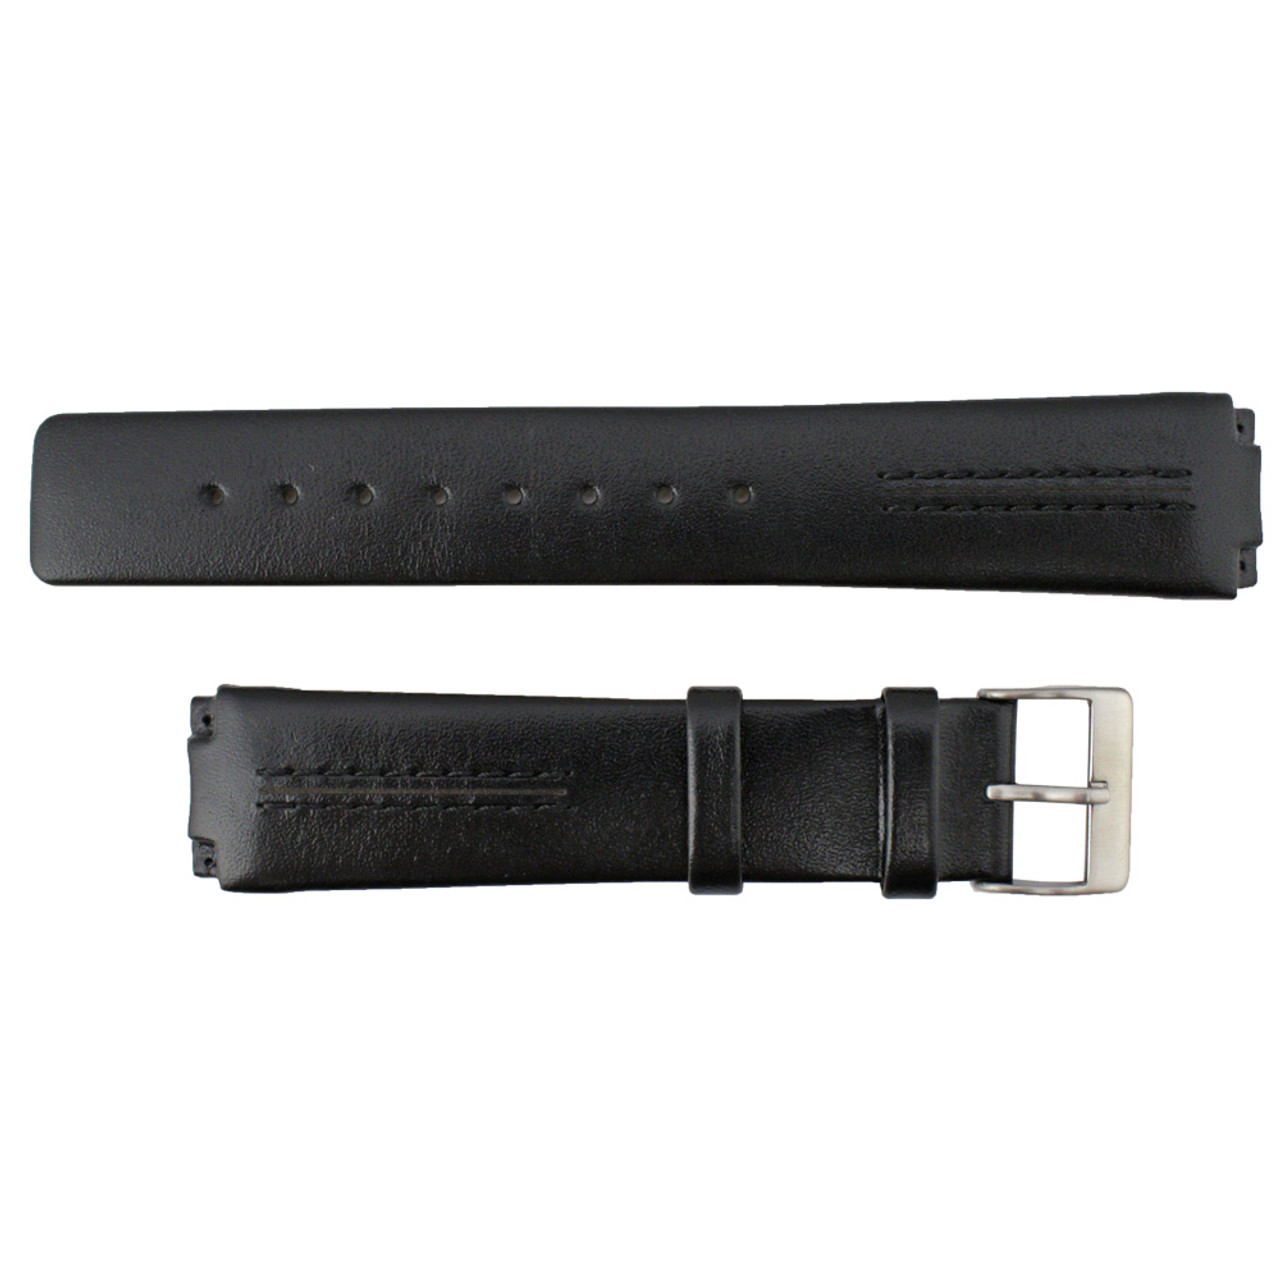 Black Watch Strap 20mm Smooth Calf Generic Made to Fit Skagen® 7 13/16